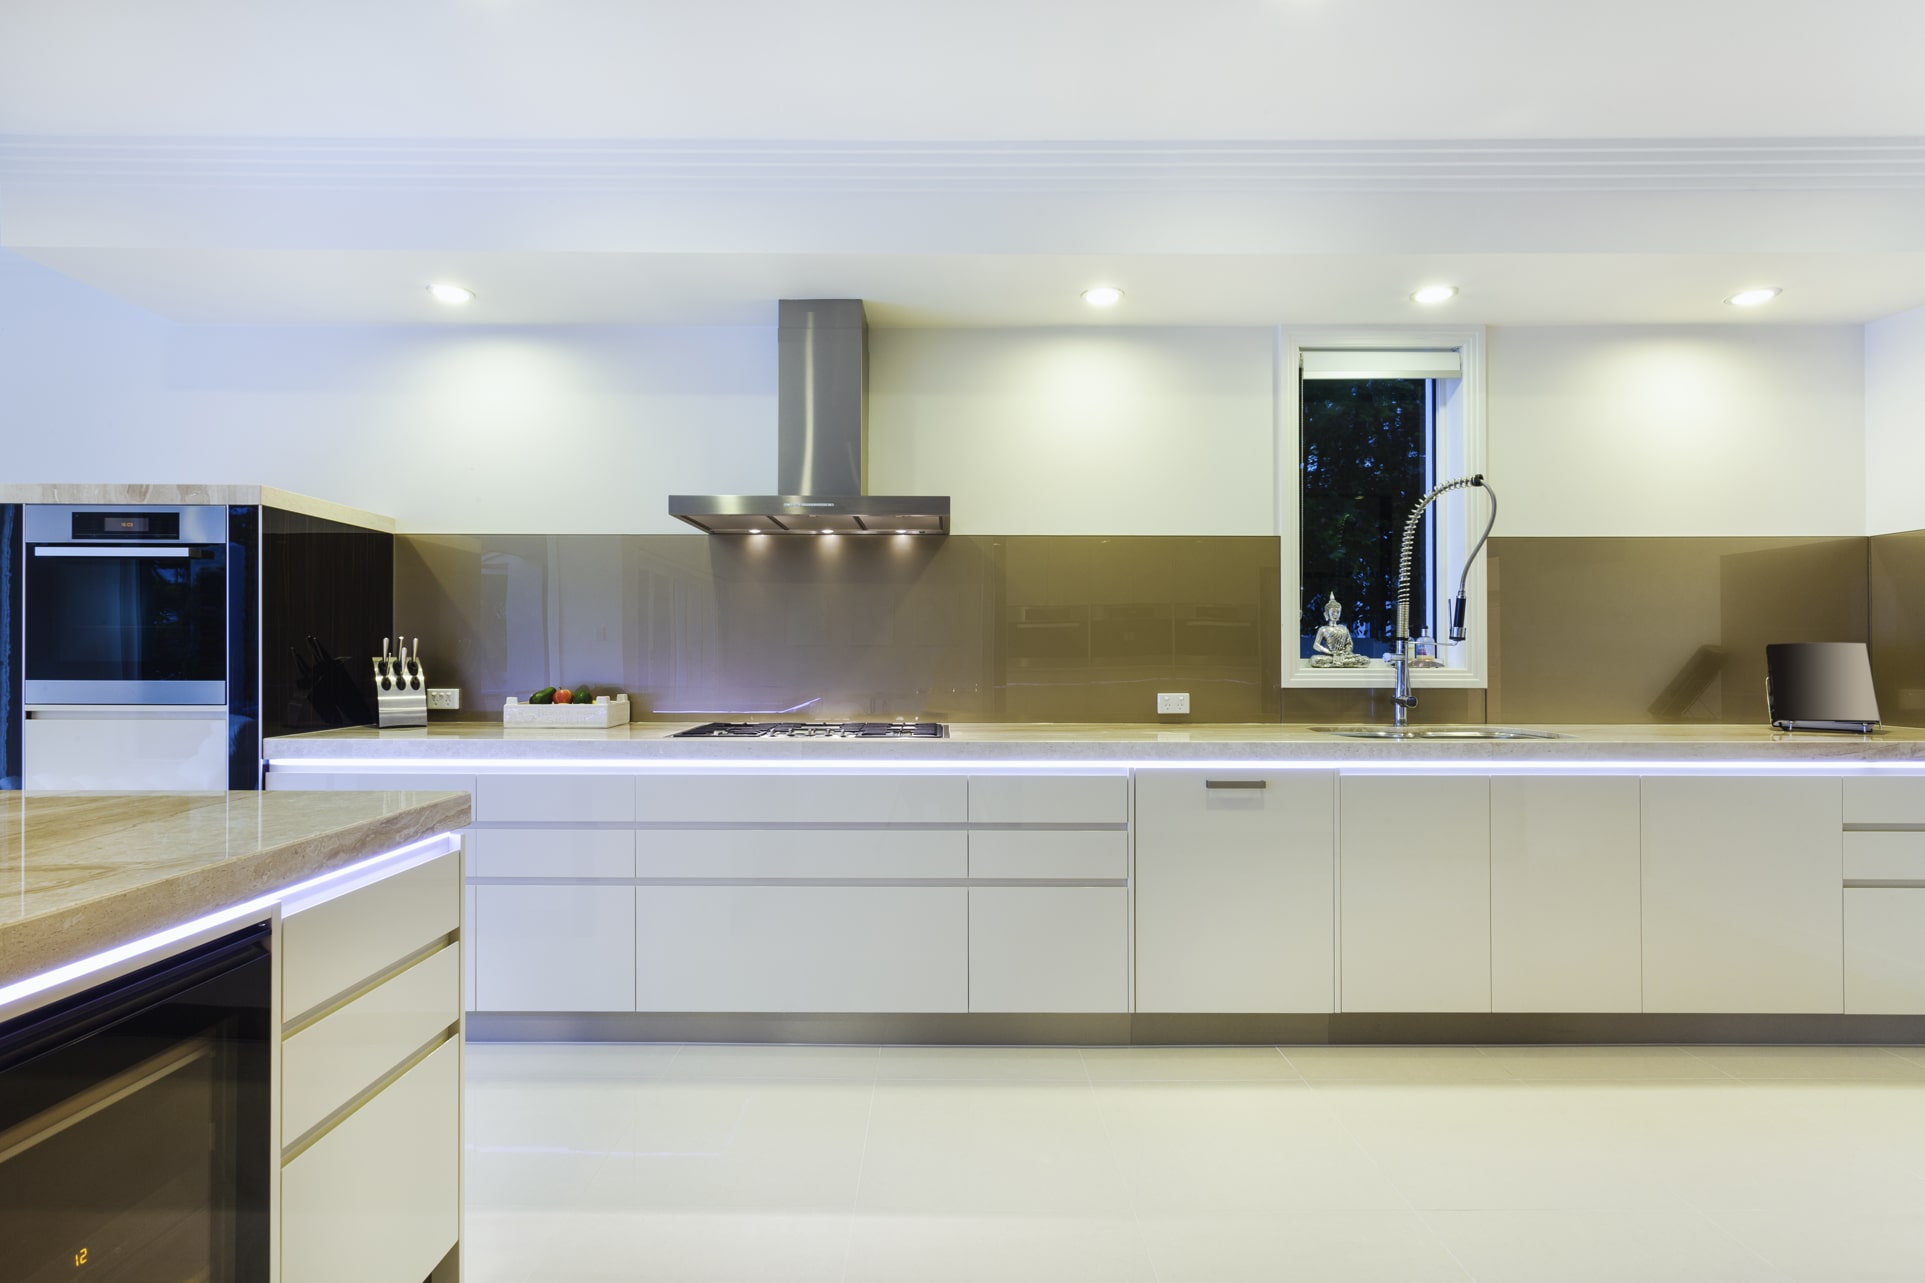 https://www.efficient-cleaninglondon.co.uk/wp-content/uploads/Deep-cleaning-your-kitchen.jpg